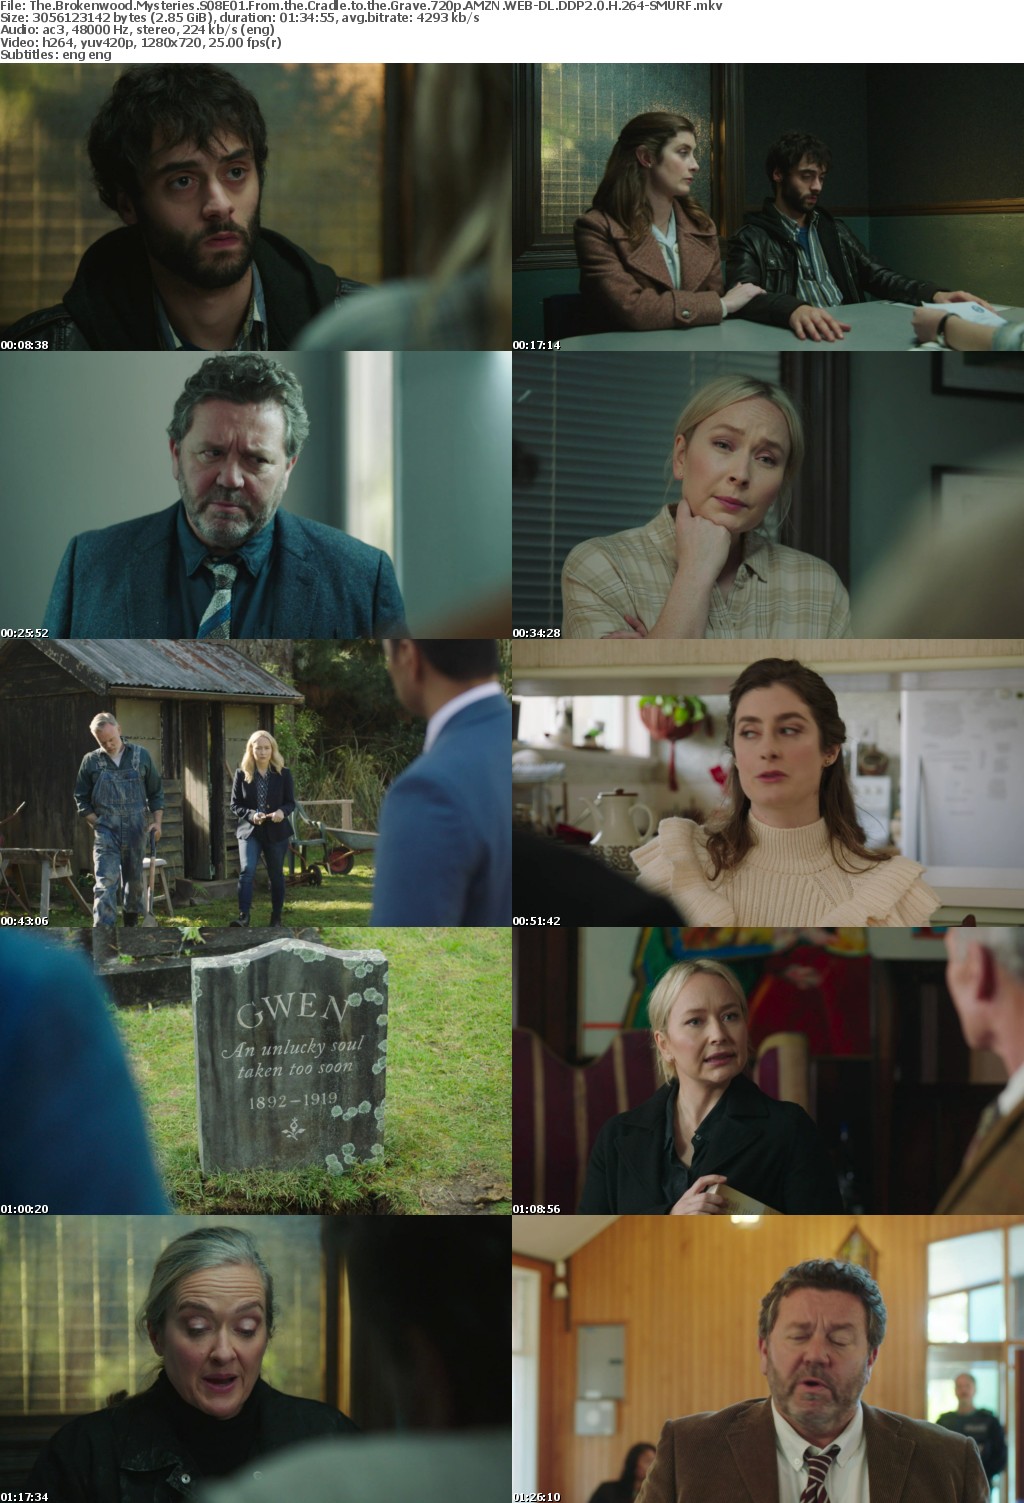 The Brokenwood Mysteries S08E01 From the Cradle to the Grave 720p AMZN WEB-DL DDP2 0 H 264-SMURF